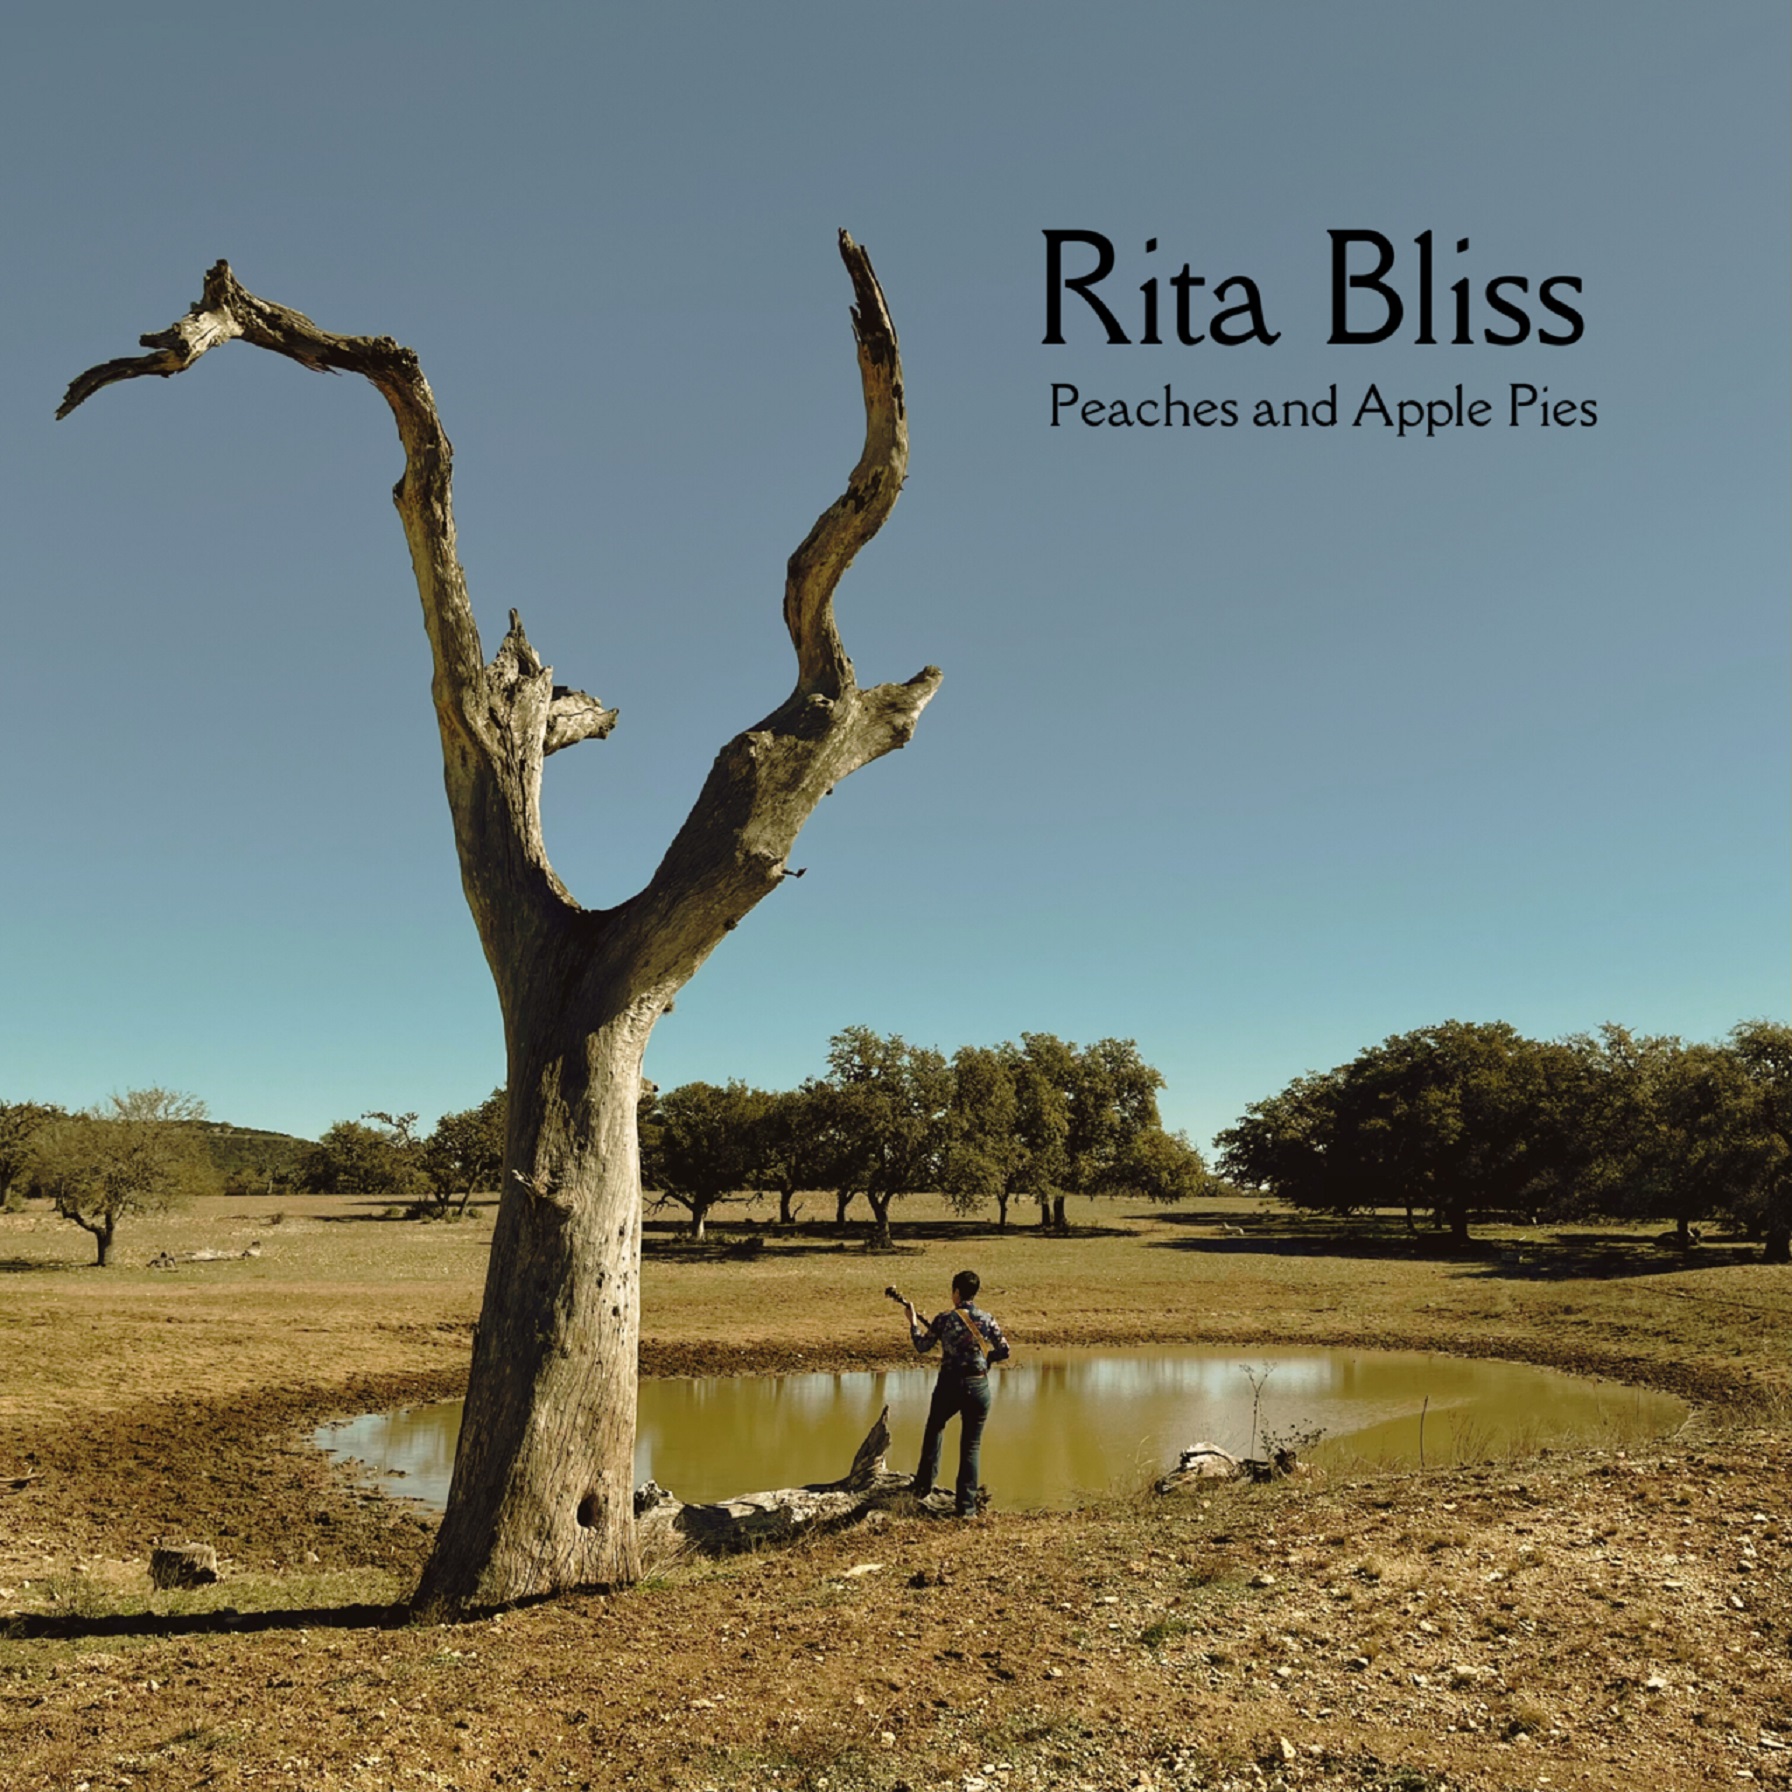 Austin's Rita Bliss Releases Bluegrass/Folk-leaning Debut Album, 'Peaches and Apple Pies,' July 19